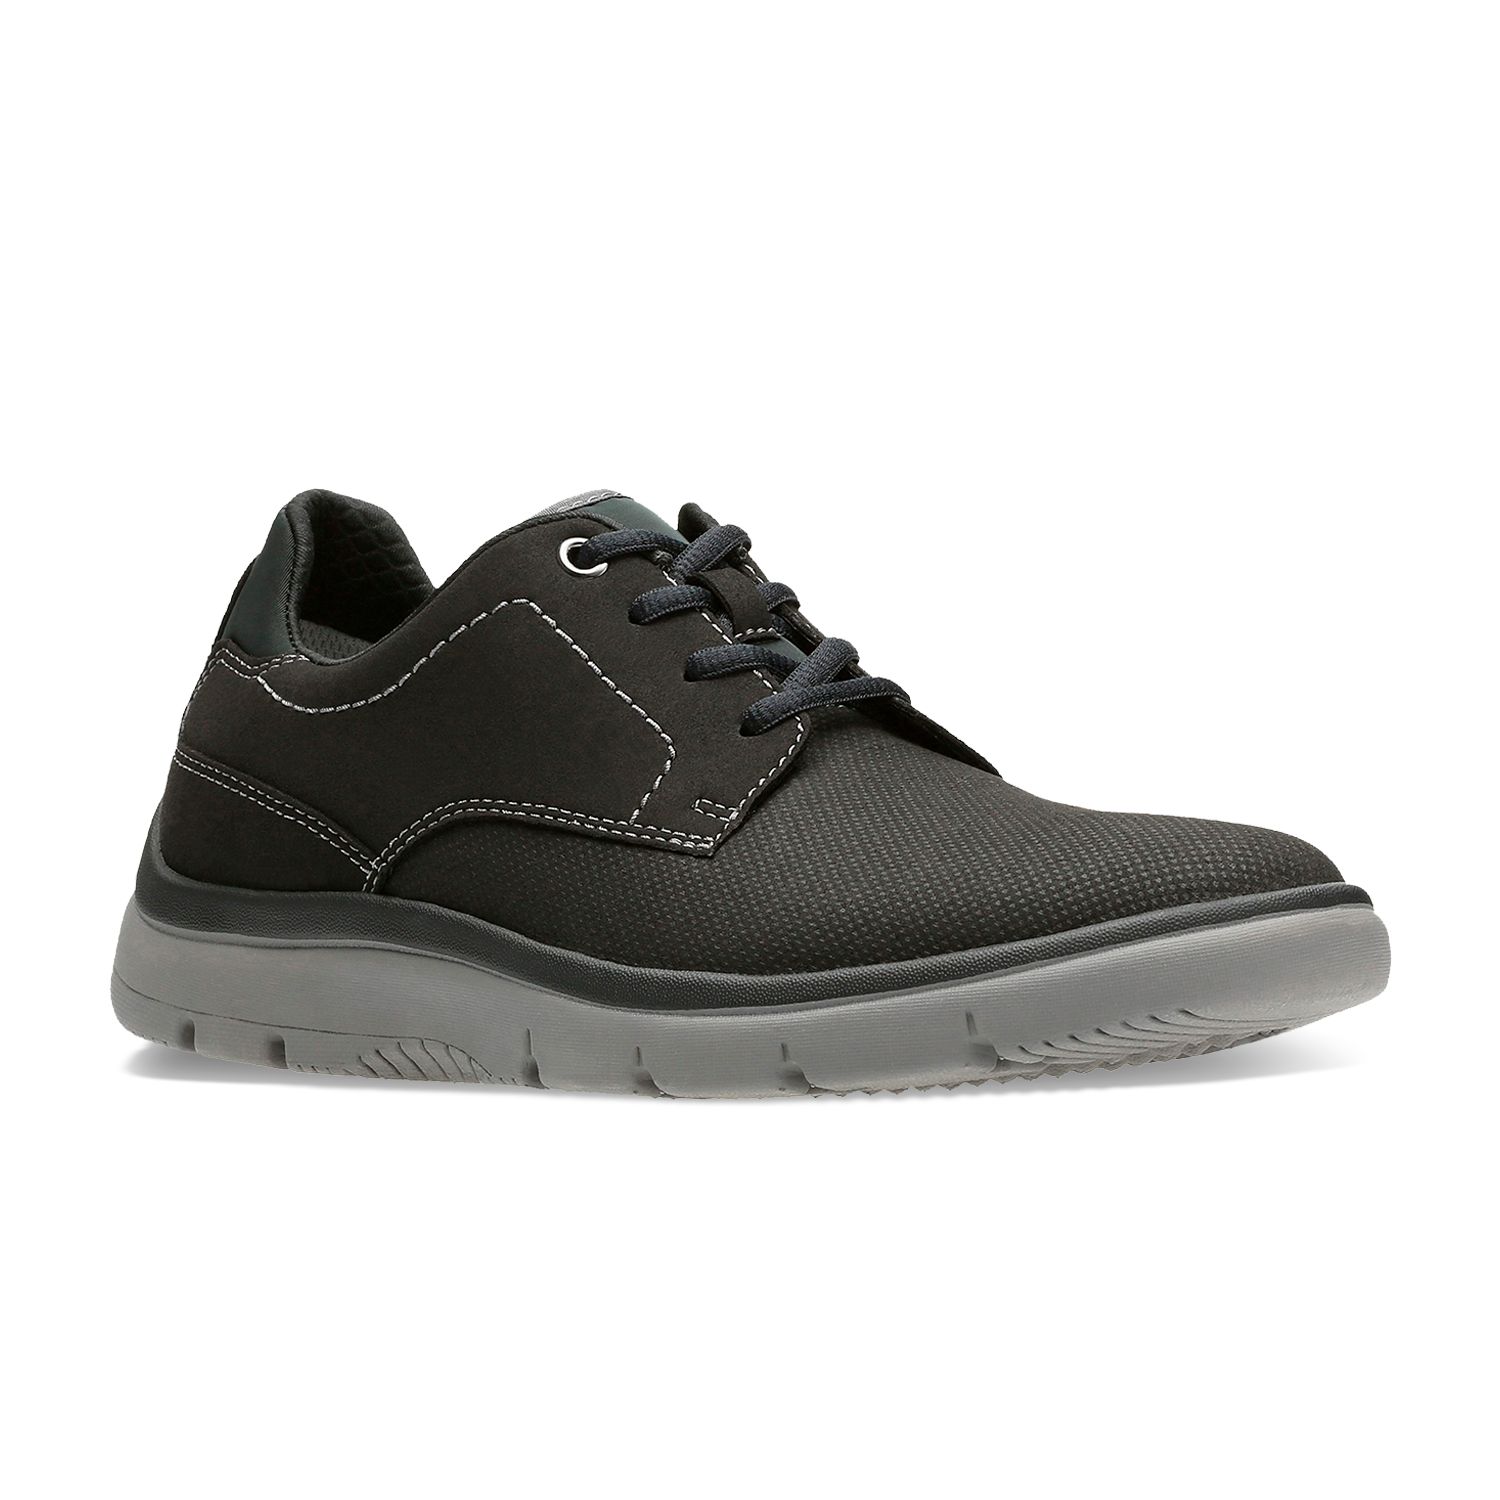 cloudsteppers by clarks mens